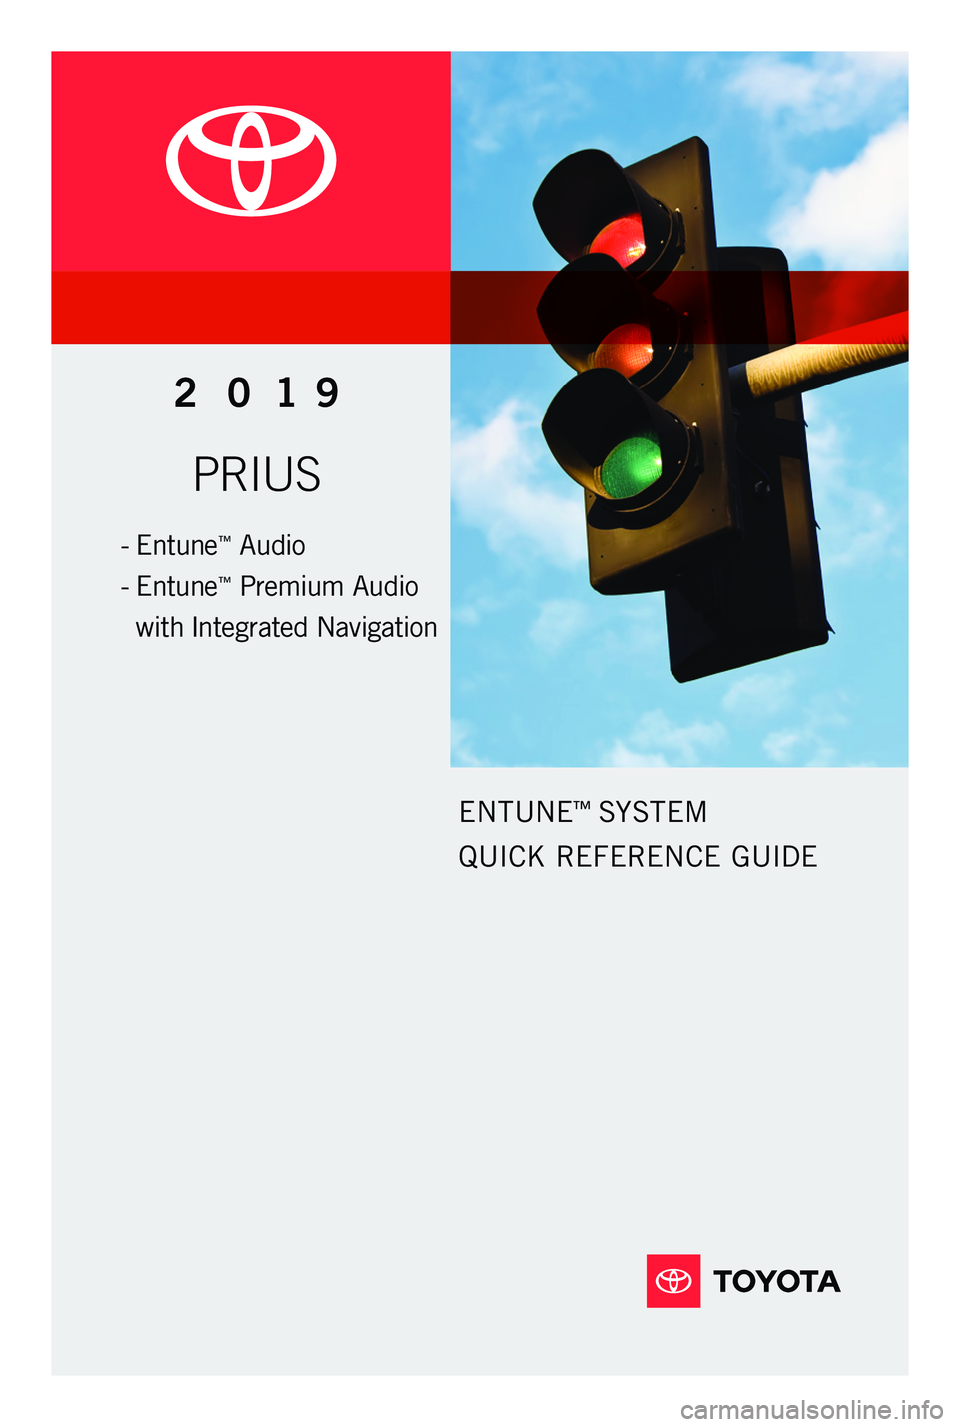 TOYOTA PRIUS 2019  Accessories, Audio & Navigation (in English) PRIUS
2 0 19
ENTUNE™ SYSTEM  
QUICK REFERENCE GUIDE
-   Entune™ Audio
-
 

 
Entune
™ Premium Audio   
with Integrated Navigation
116673_18-MKG-12453 - MY18 Prius Entune Nav QRG_R2.indd   212/5/